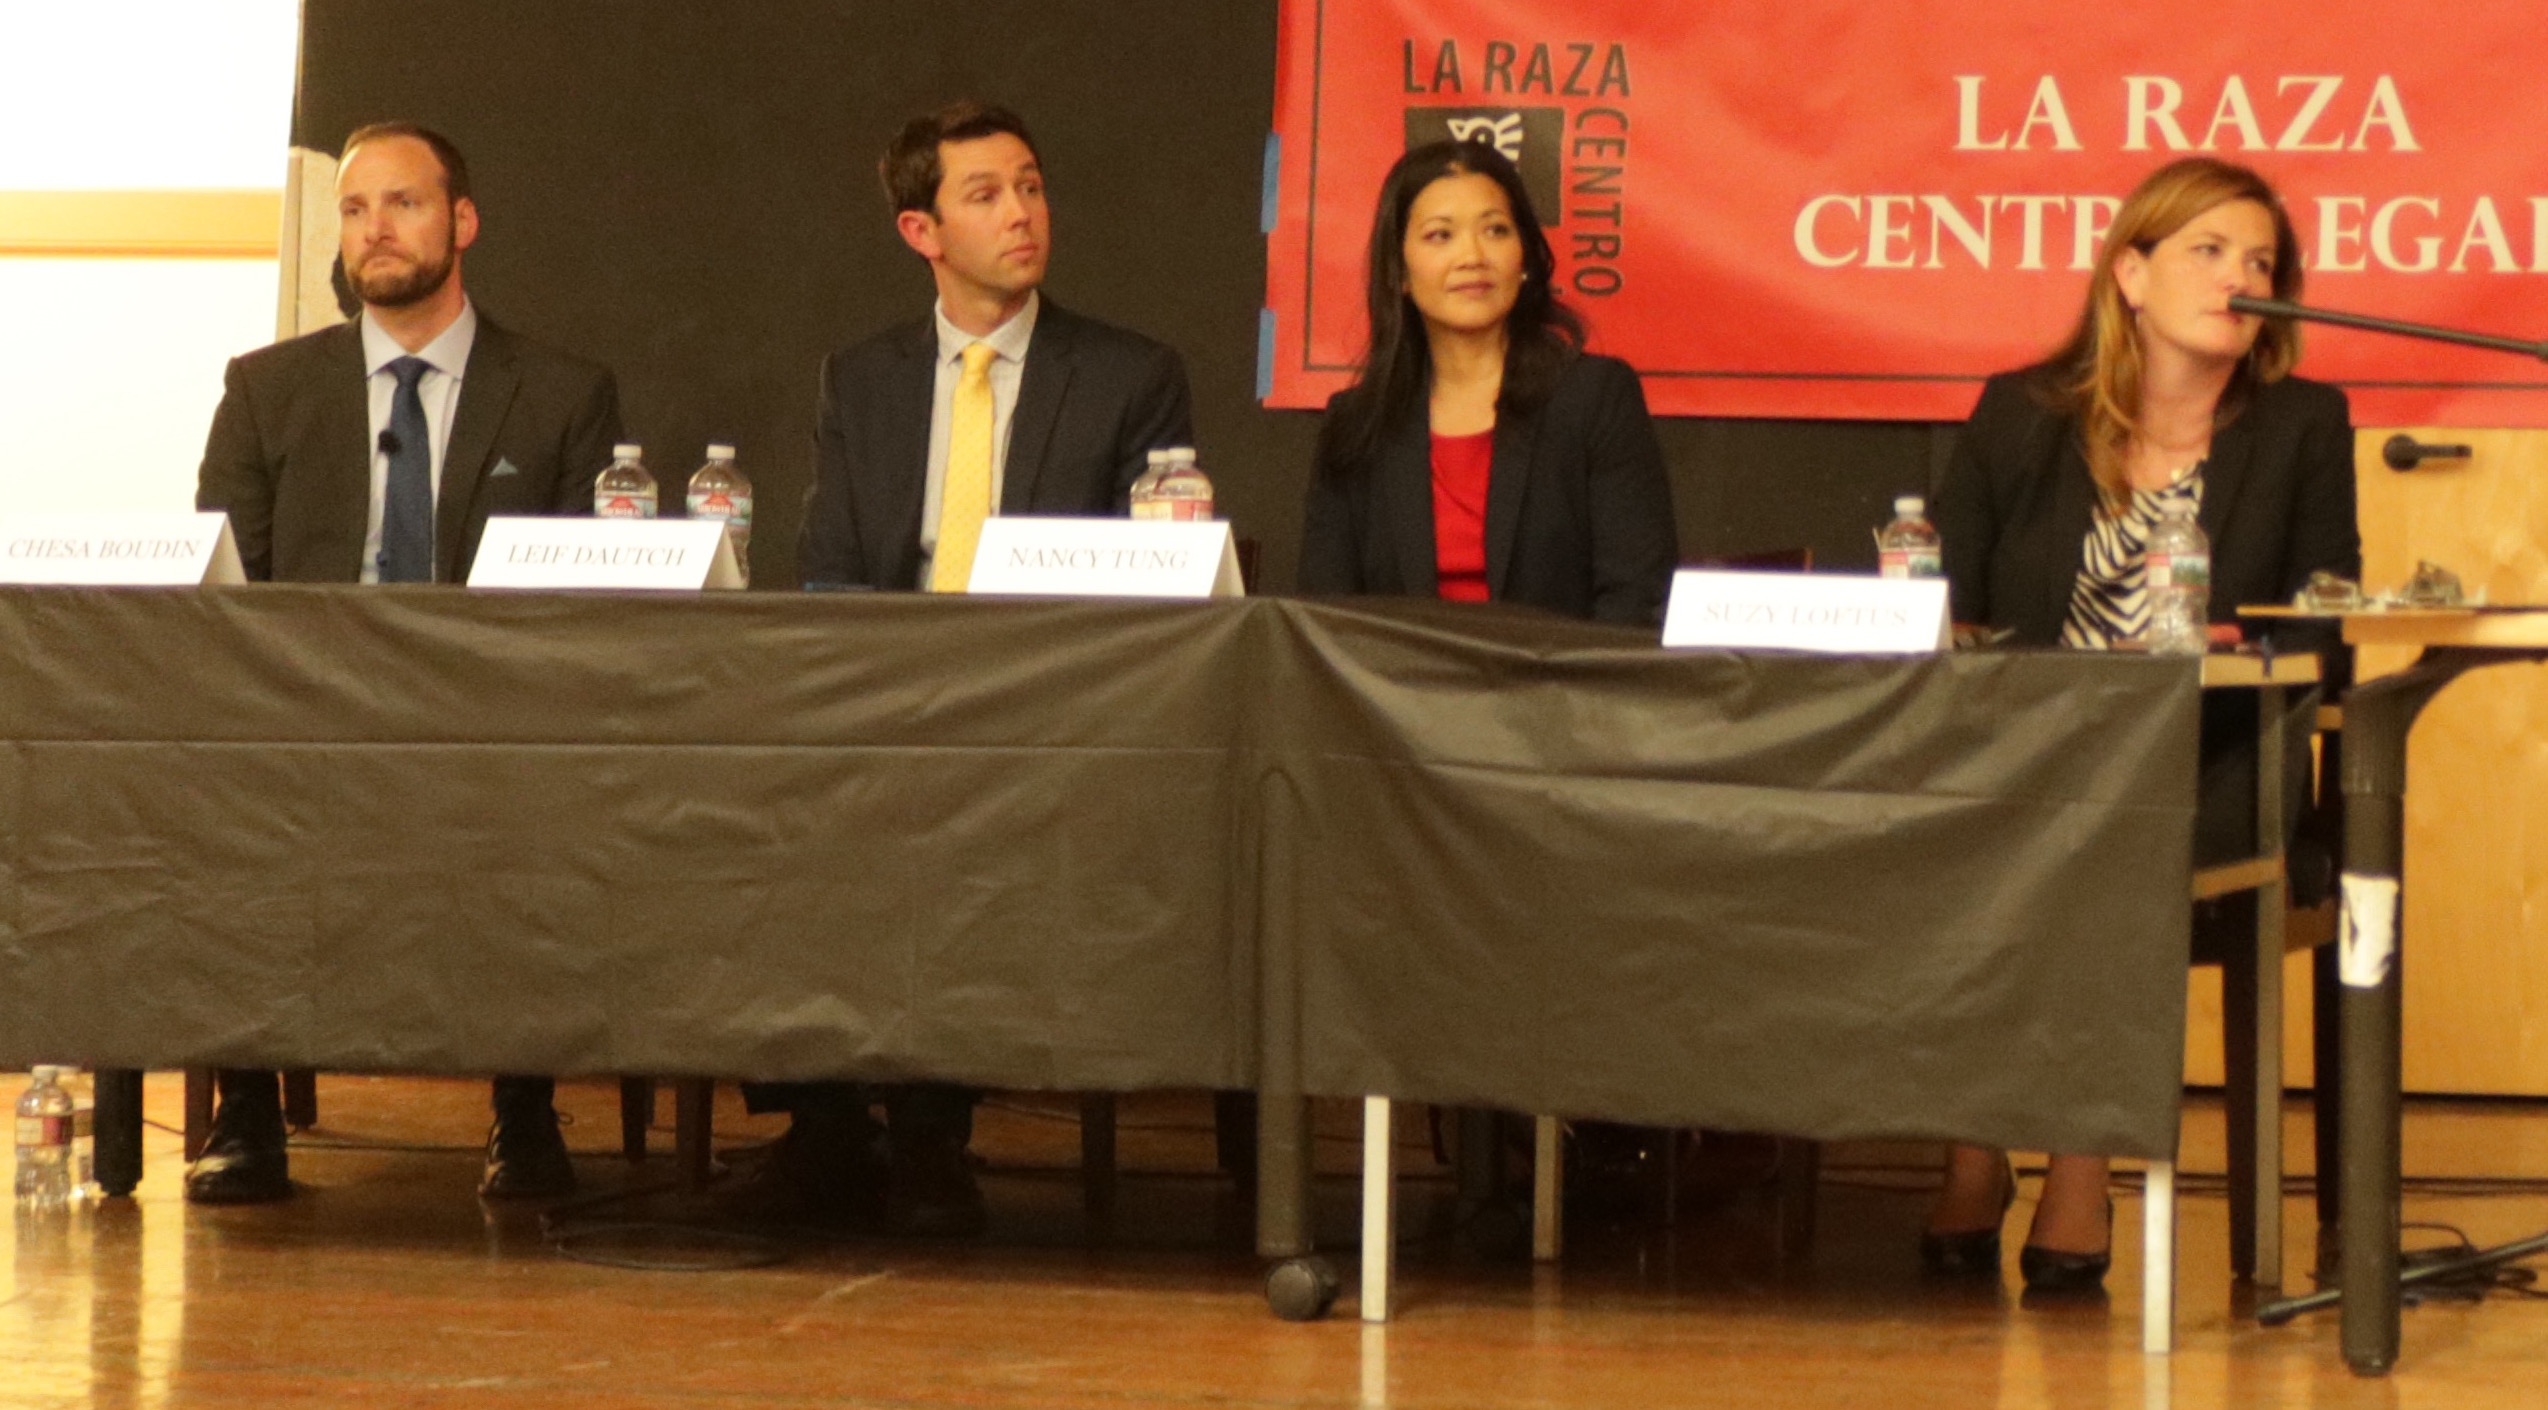 Chesa Boudin, Leif Dautch, Nancy Tung and Suzy Loftus at a forum for San Francisco District Attorney candidates.